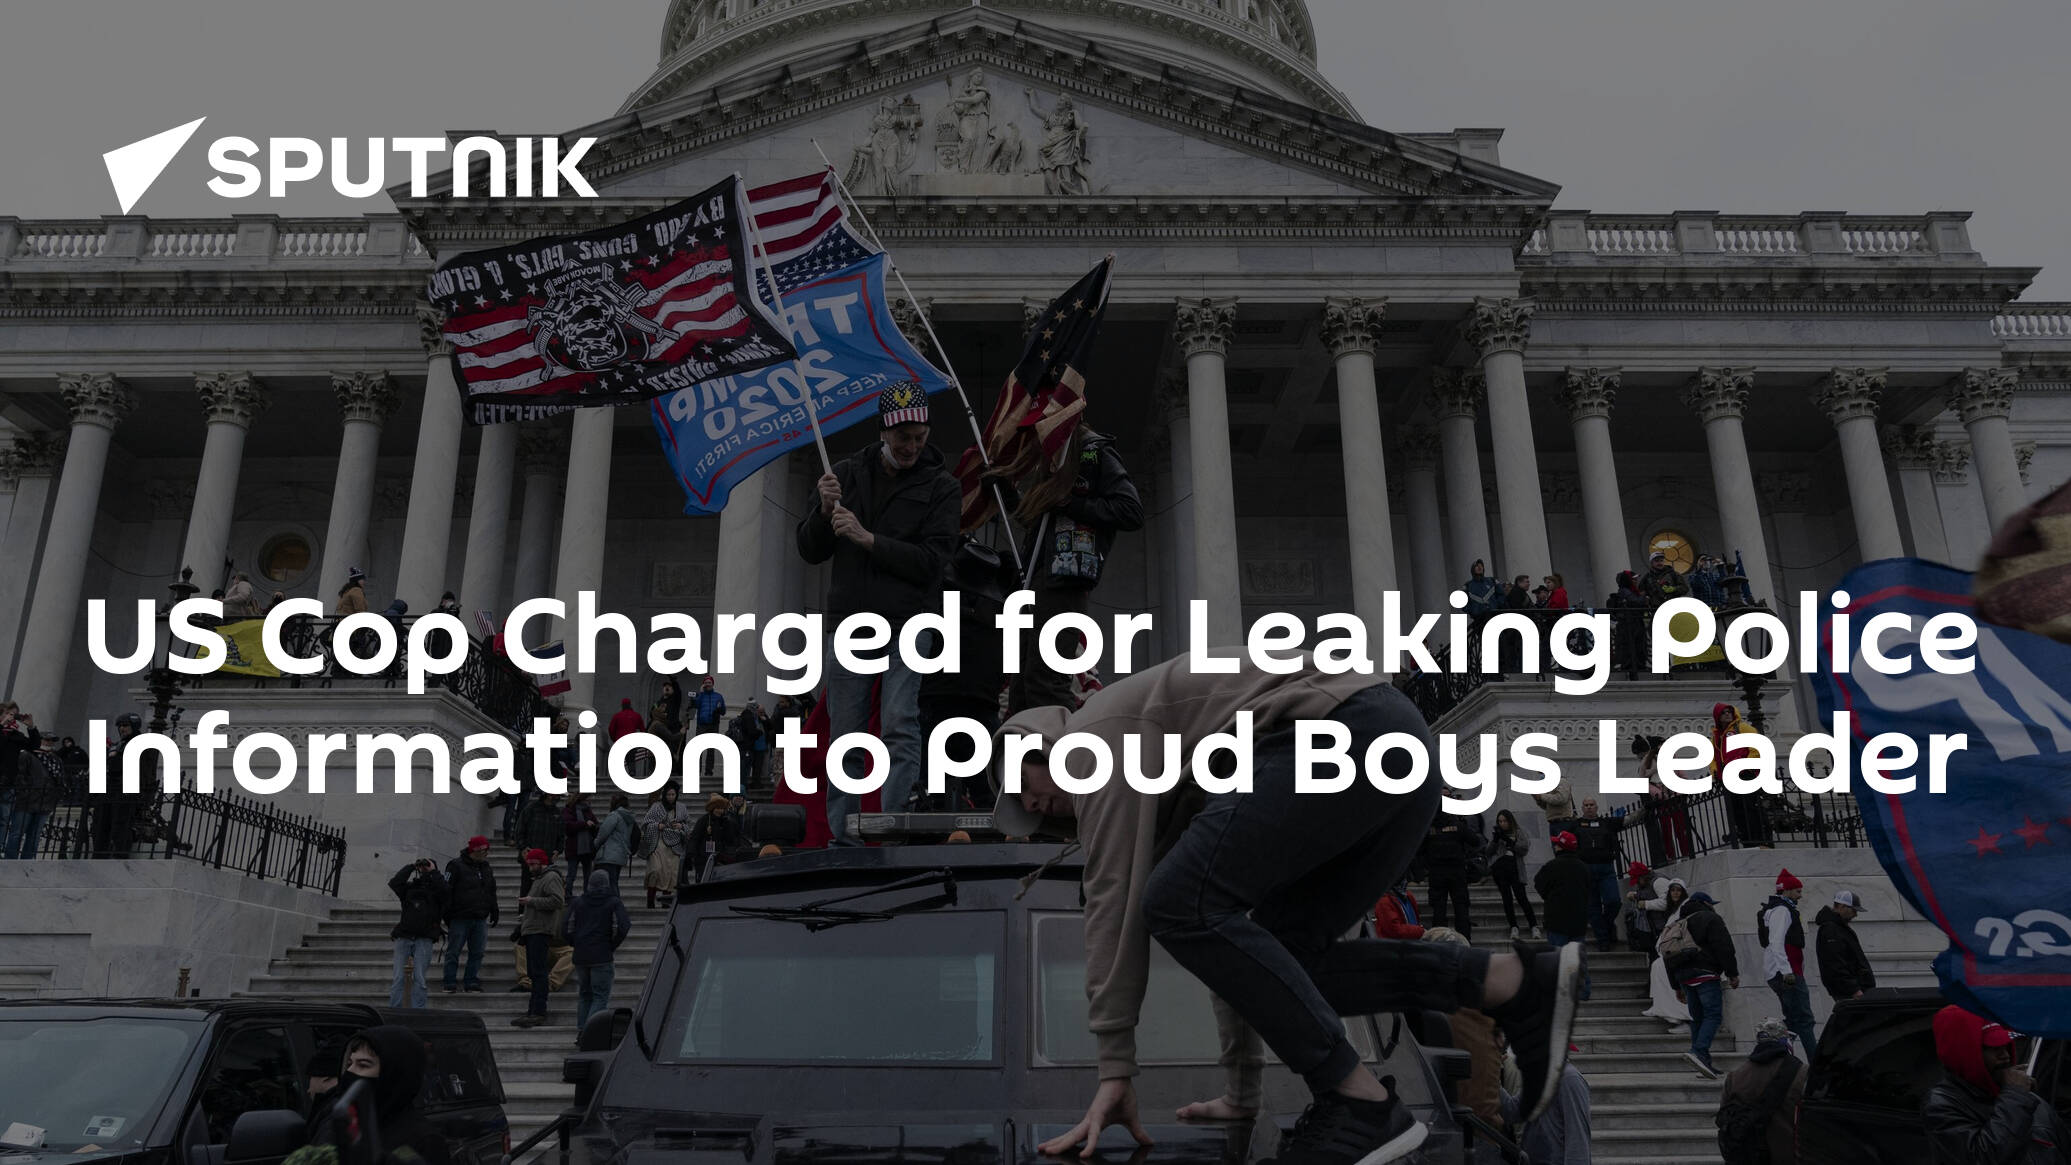 US Cop Charged for Leaking Police Information to Proud Boys Leader